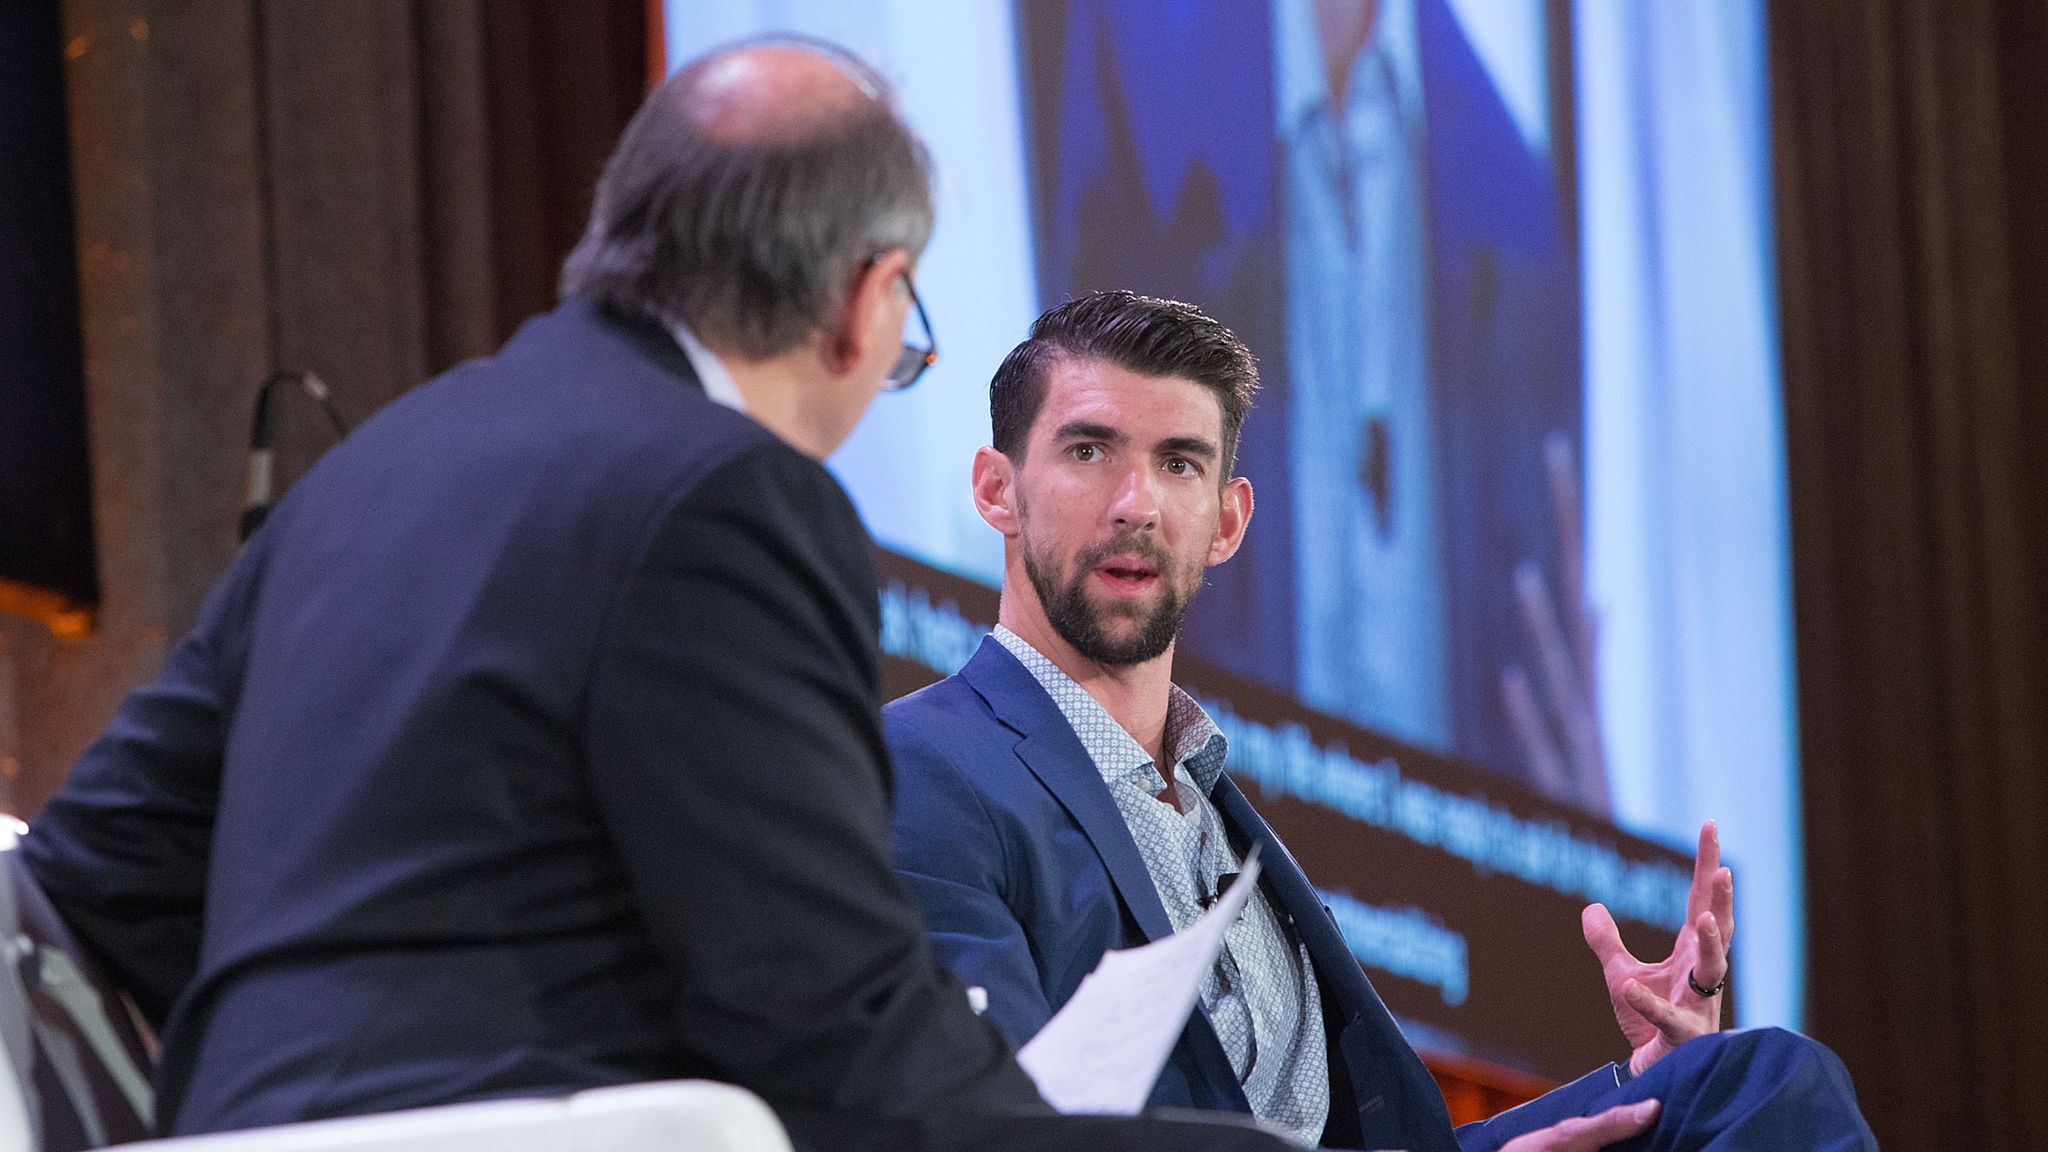 Michael Phelps: World's greatest swimmer says depression drove him to ...